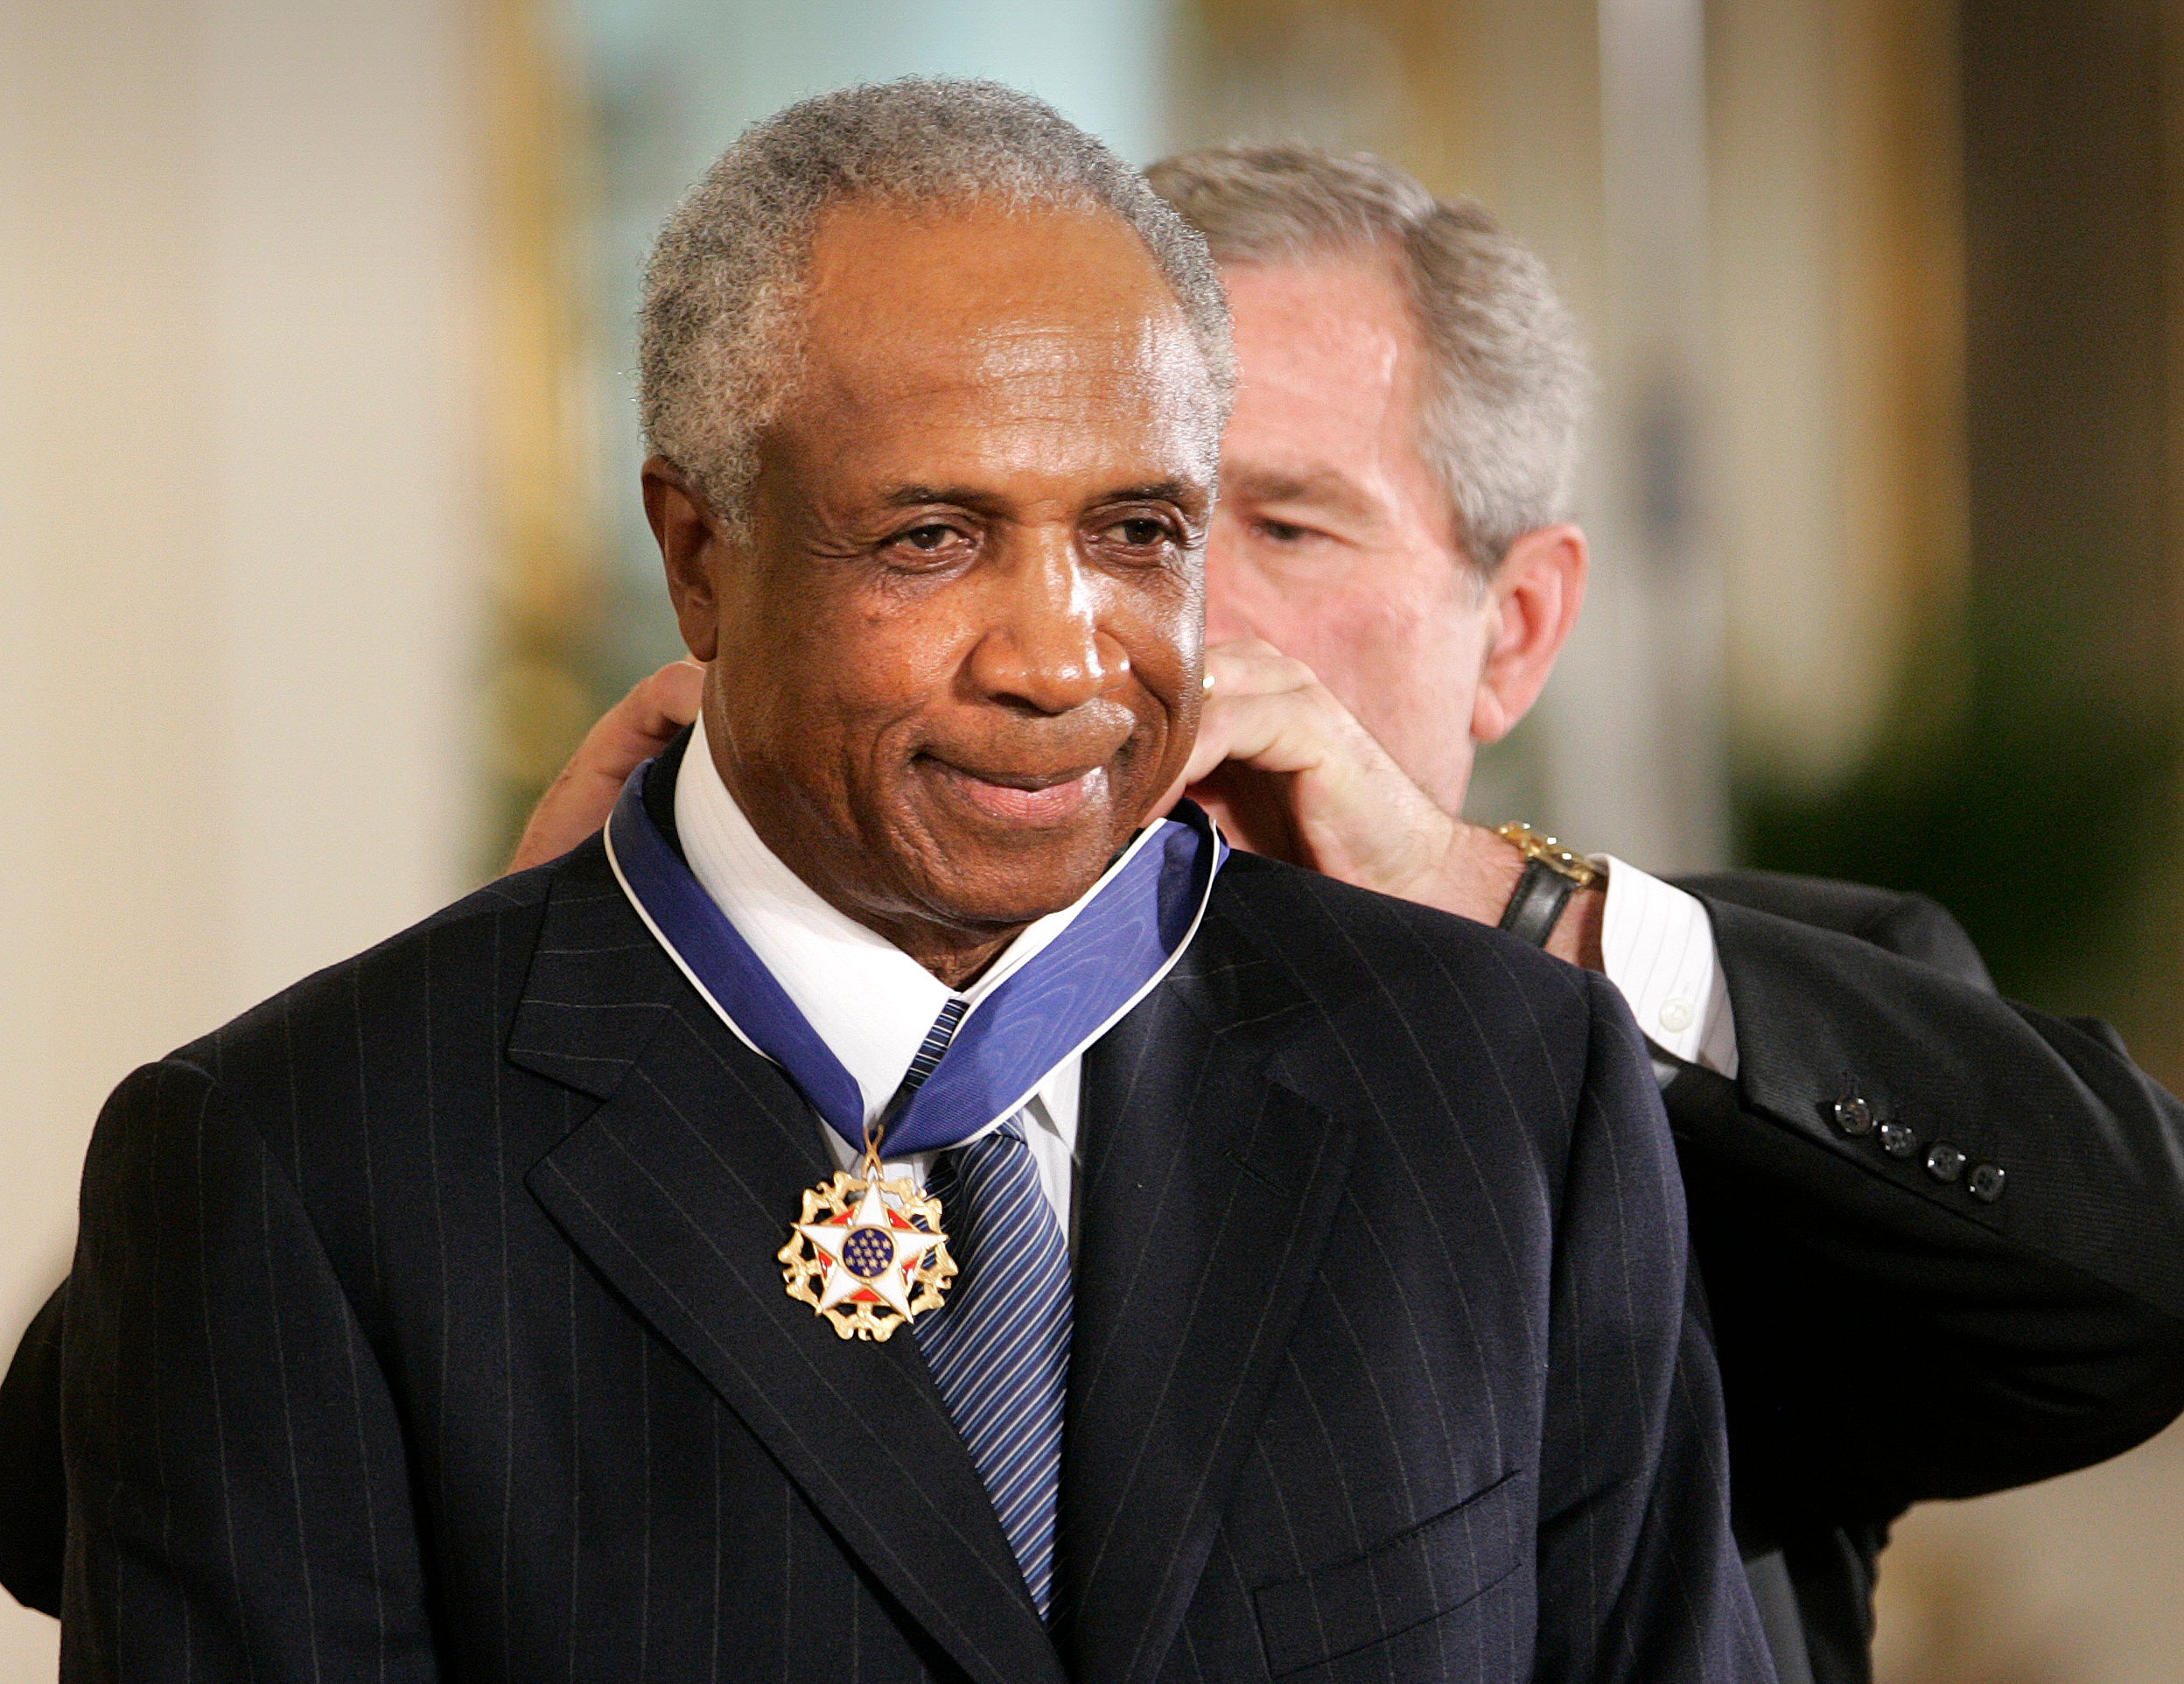 Hall of Famer Frank Robinson Passes Away at 83 - Cooperstown Cred